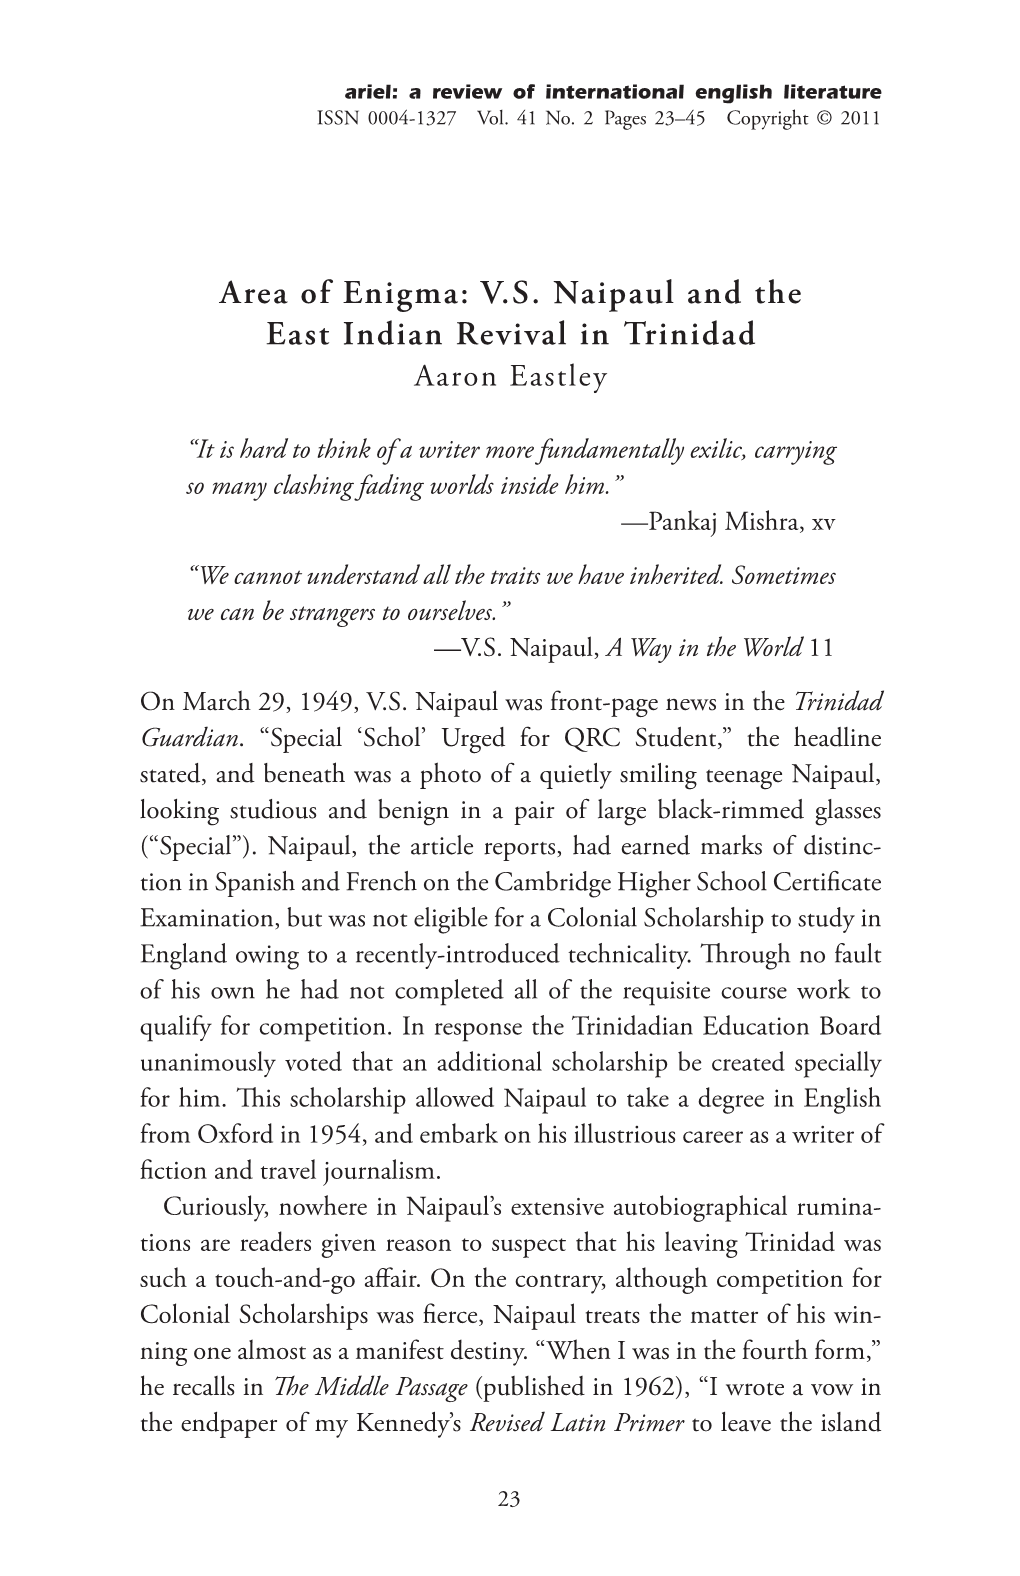 Area of Enigma: V.S. Naipaul and the East Indian Revival in Trinidad Aaron Eastley